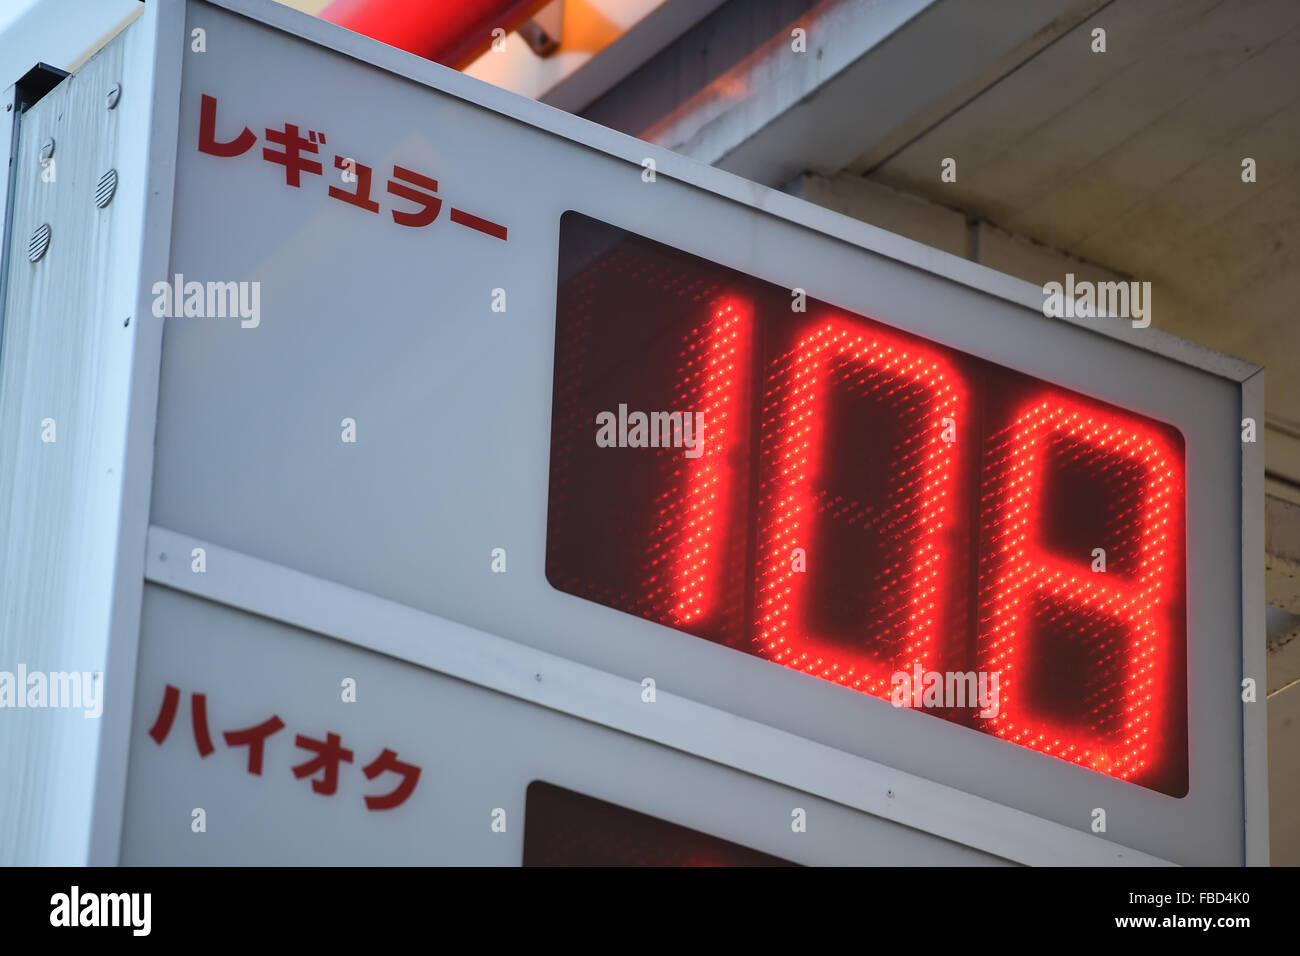 A gasoline stand in Monzen-nakacho advertises regular gasoline at 108 yen per liter on January 15, 2016, in Tokyo, Japan. The average price of a liter of regular gasoline dropped below 120 Yen for the first time since May 2009 as a result of falling global oil prices. © Shingo Ito/AFLO/Alamy Live News Stock Photo